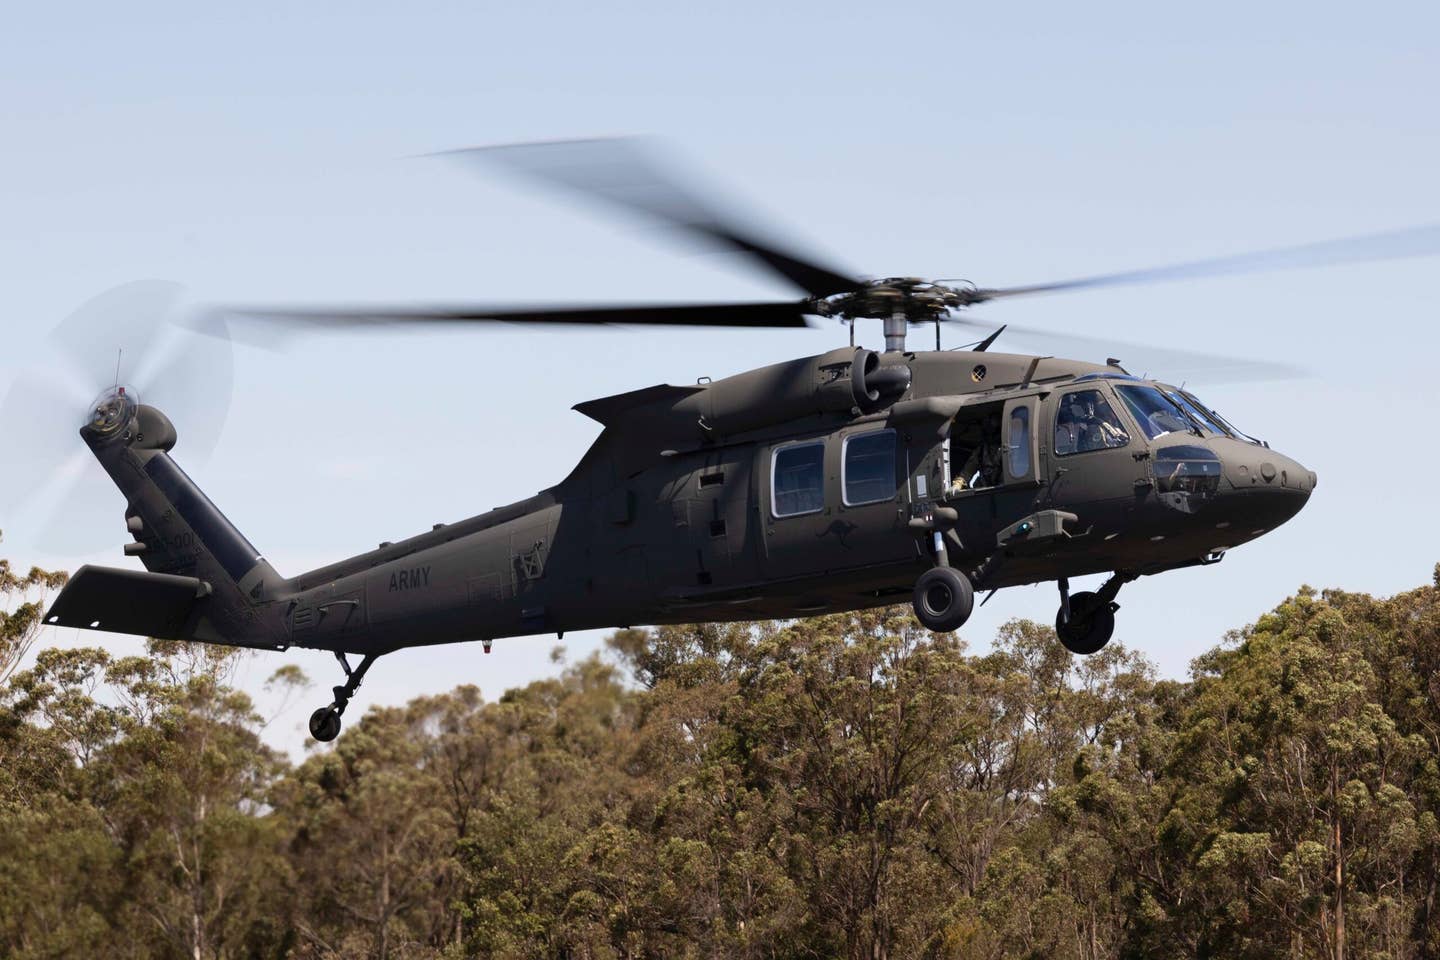 One of the first flights of the Australian Army’s three early delivery UH-60M Black Hawk helicopters, conducted by the 6th Aviation Regiment’s 171st Special Operations Squadron, out of Luscombe Army Airfield in Sydney. <em>Commonwealth of Australia, Department of Defense</em>